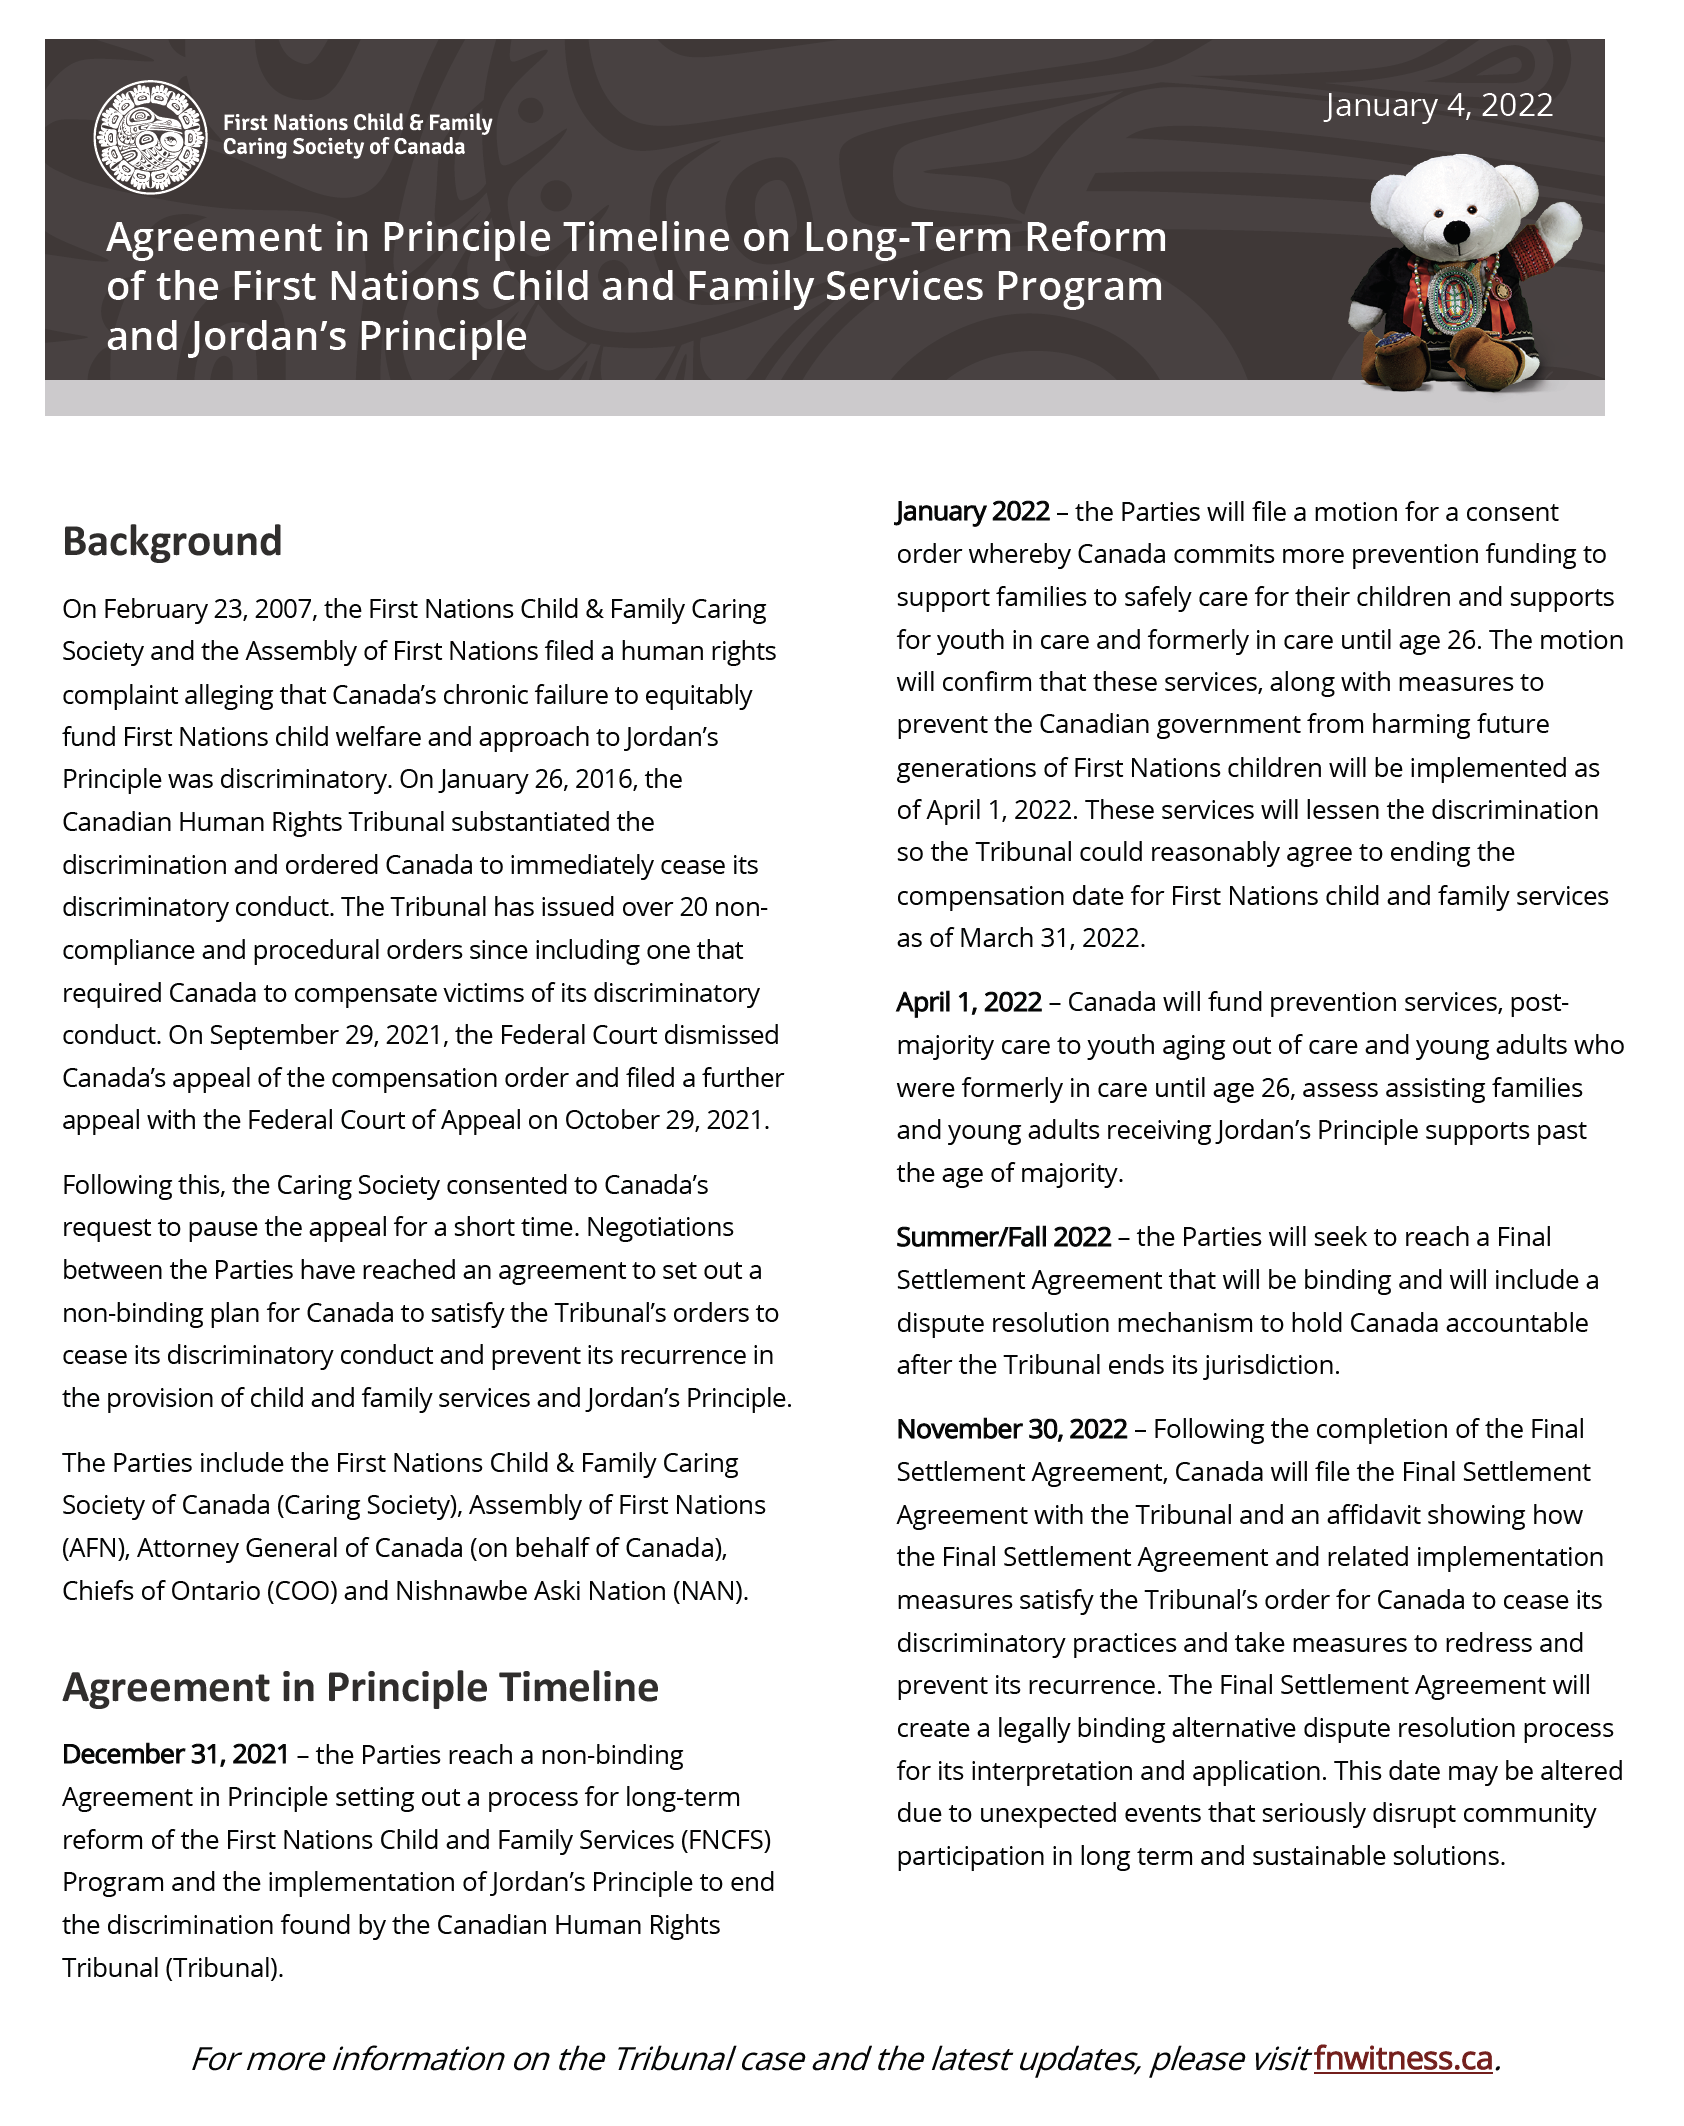 Agreement in Principle Timeline on Long-Term Reform of the First Nations Child and Family Services Program and Jordan’s Principle